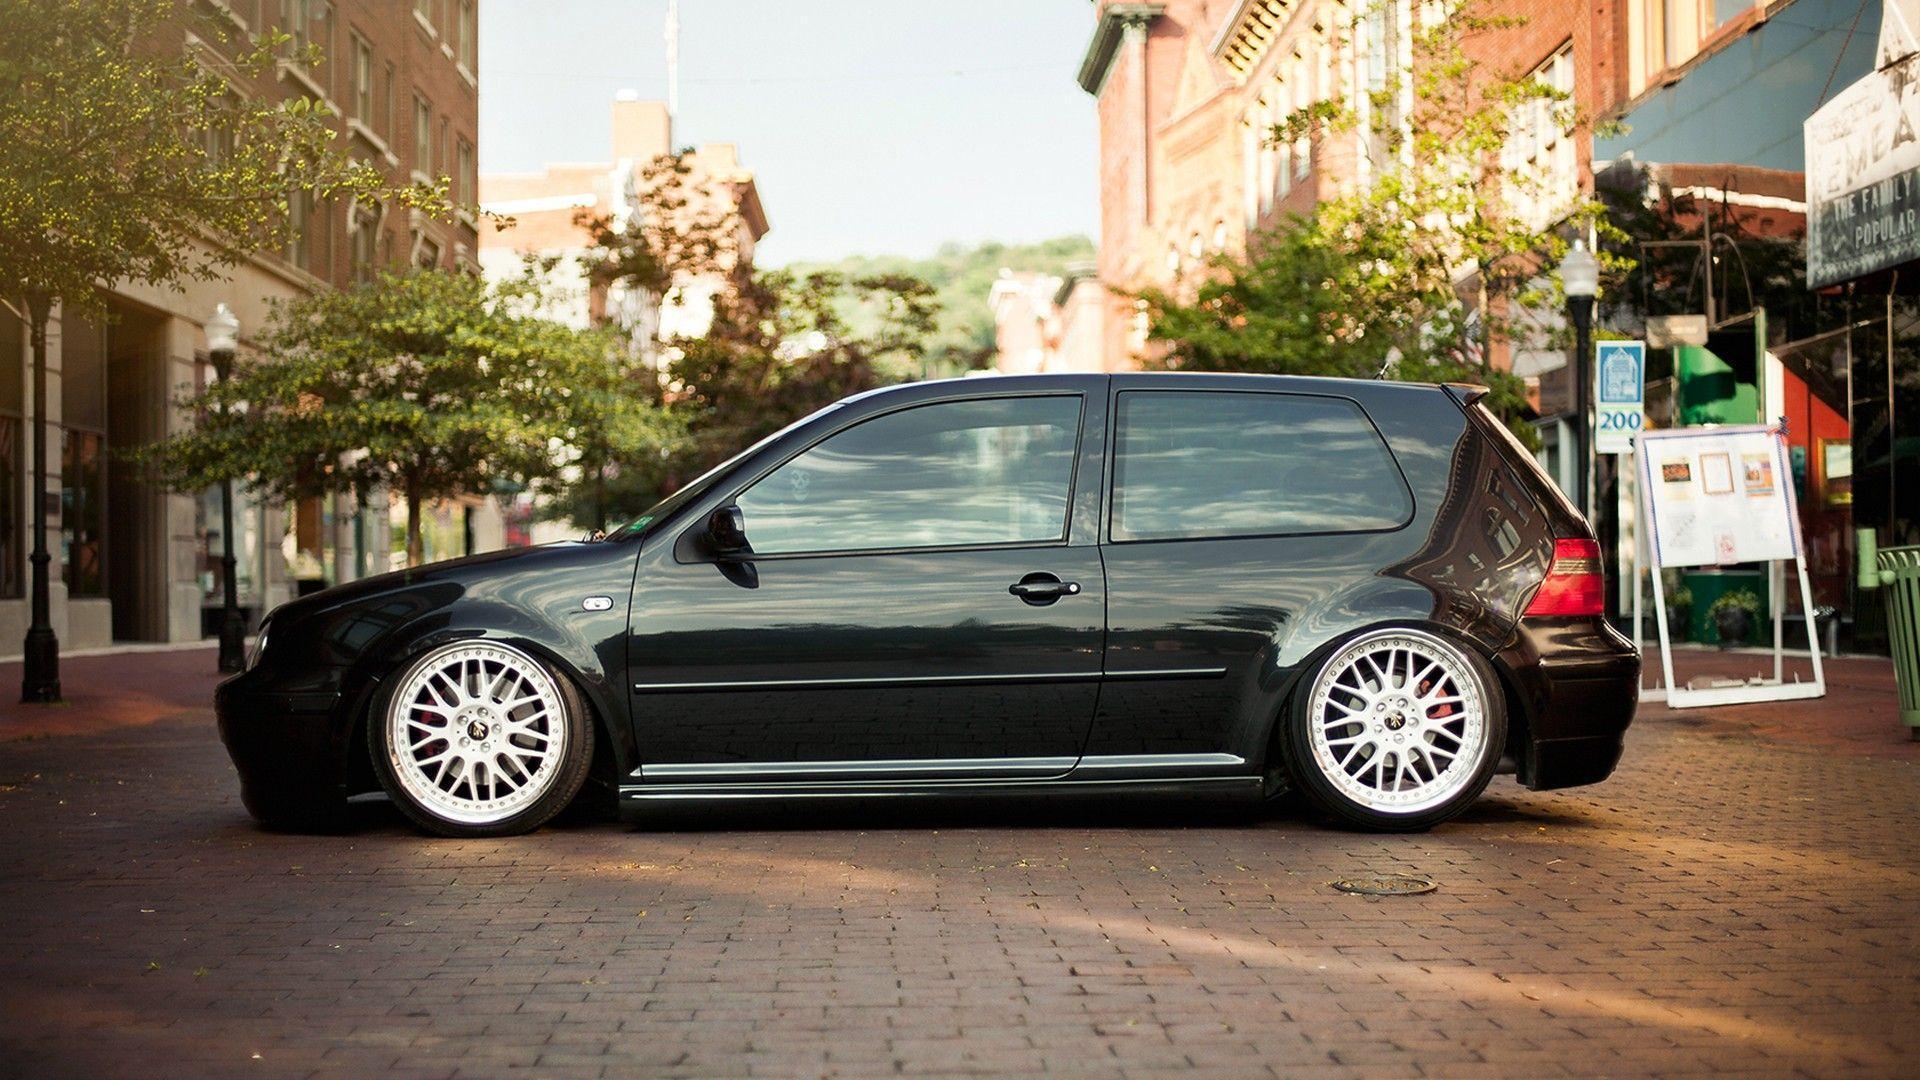 Golf Iv Picture For Desktop And Wallpaper and Background